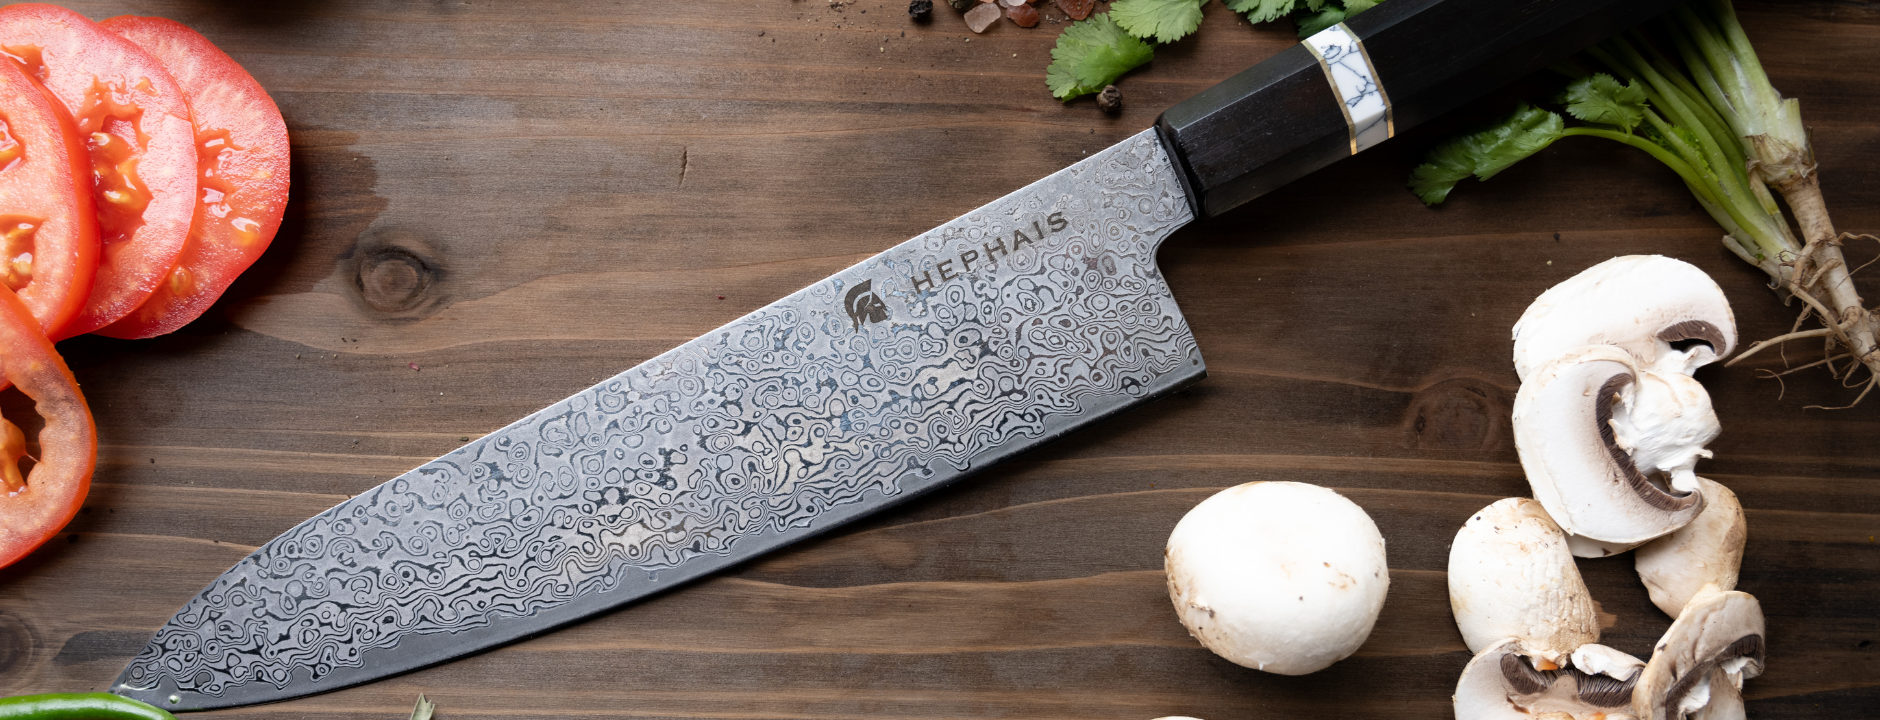 Damascus Steel Knives - Knox Chef Knife